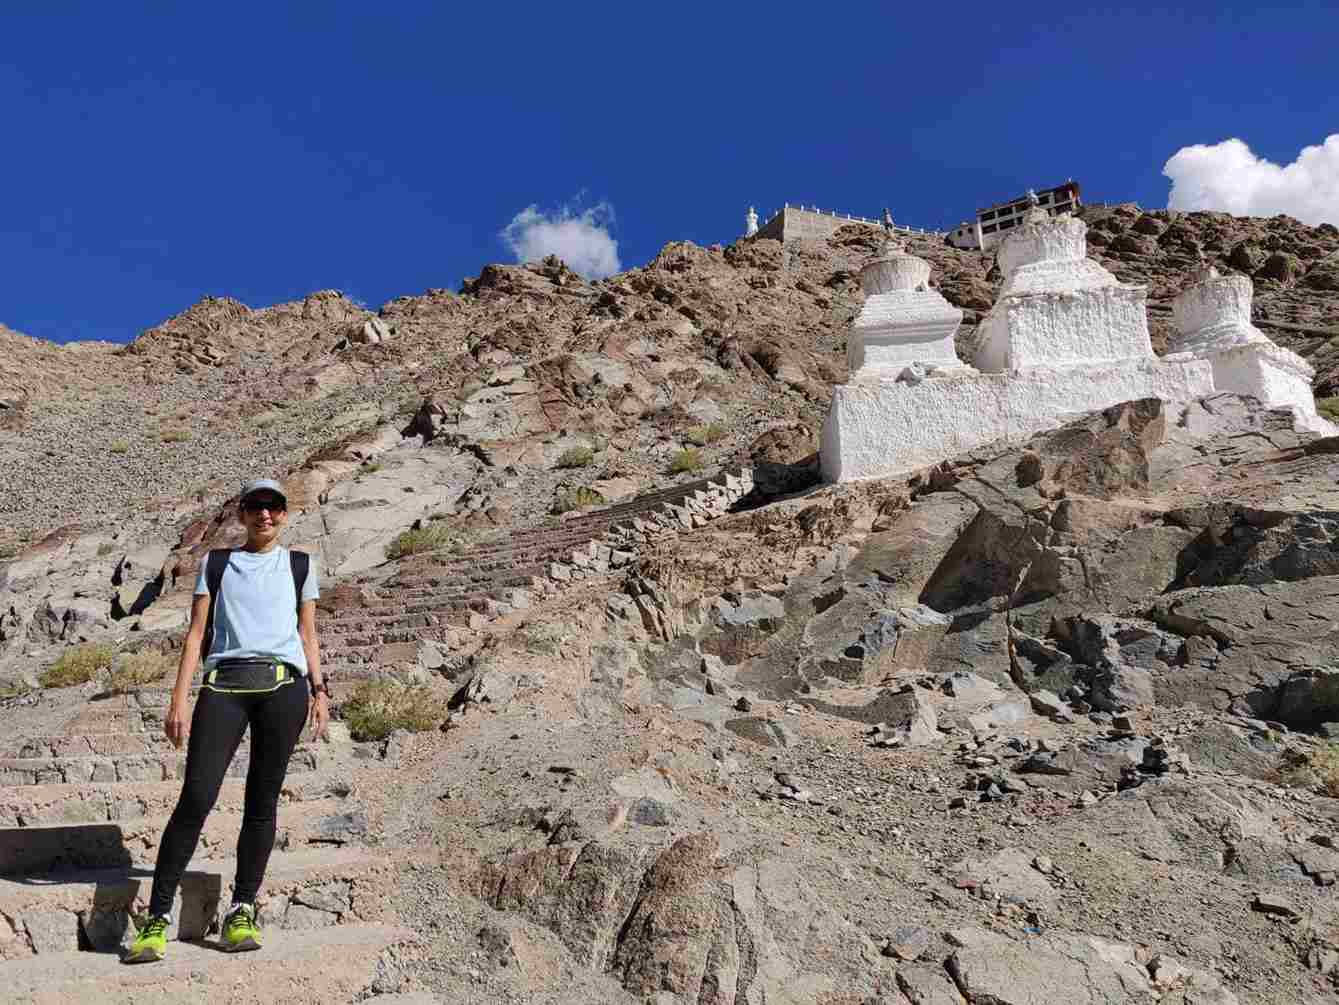 Pushpa Keya Bhatt runs marathons at the age of 66, stands at high altitudes in Ladakh where she completed the Khardung La challenge